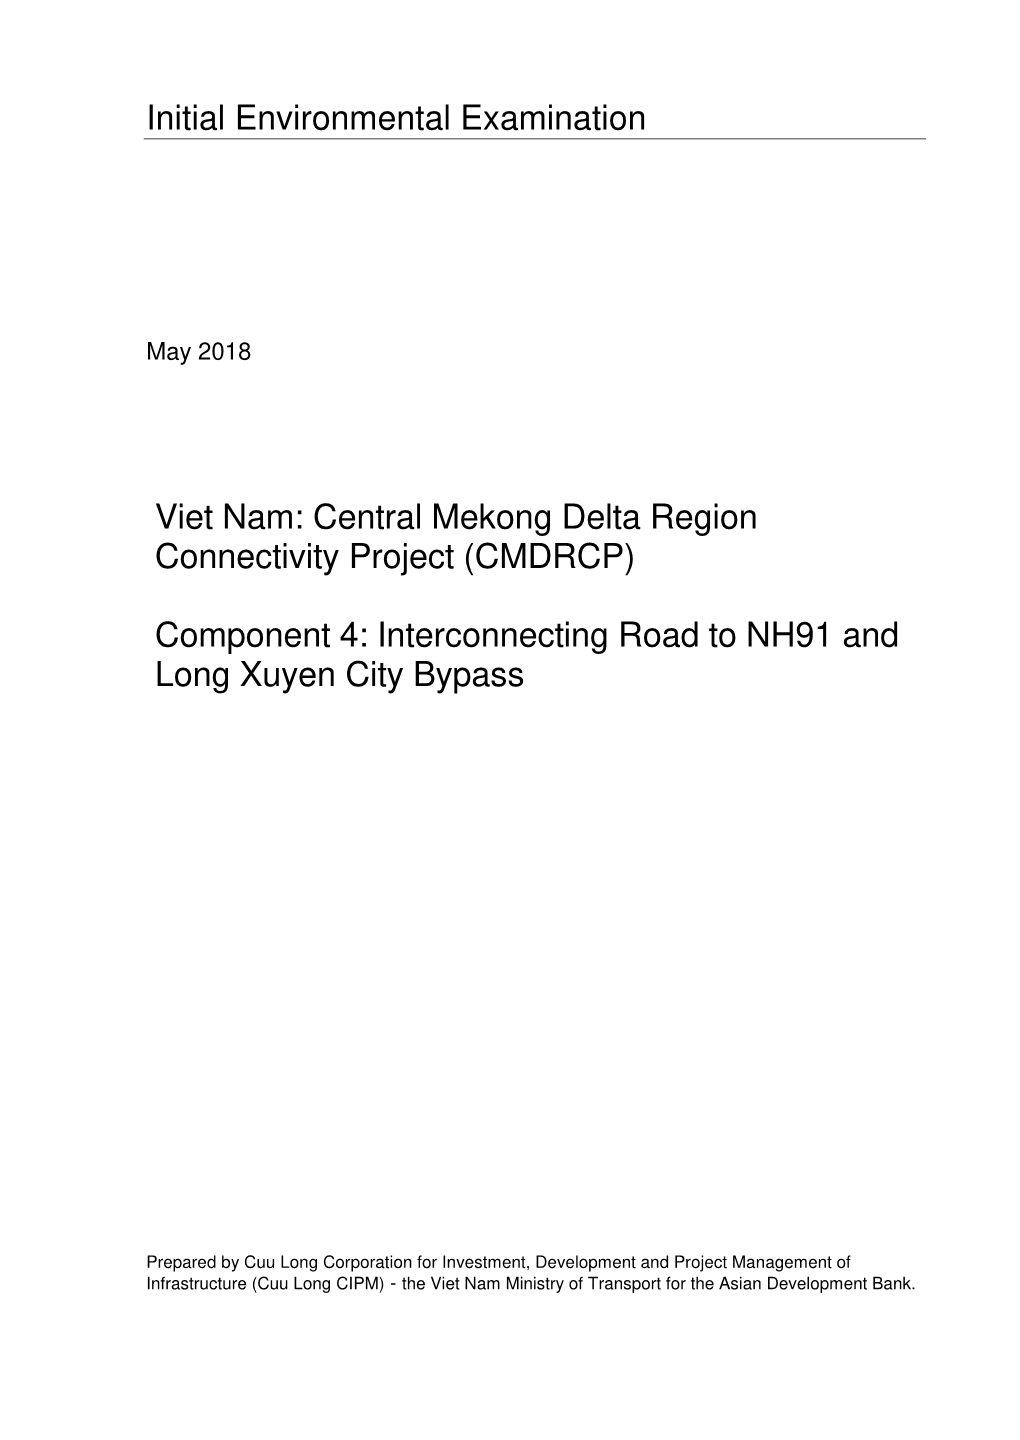 40255-033: Central Mekong Delta Region Connectivity Project